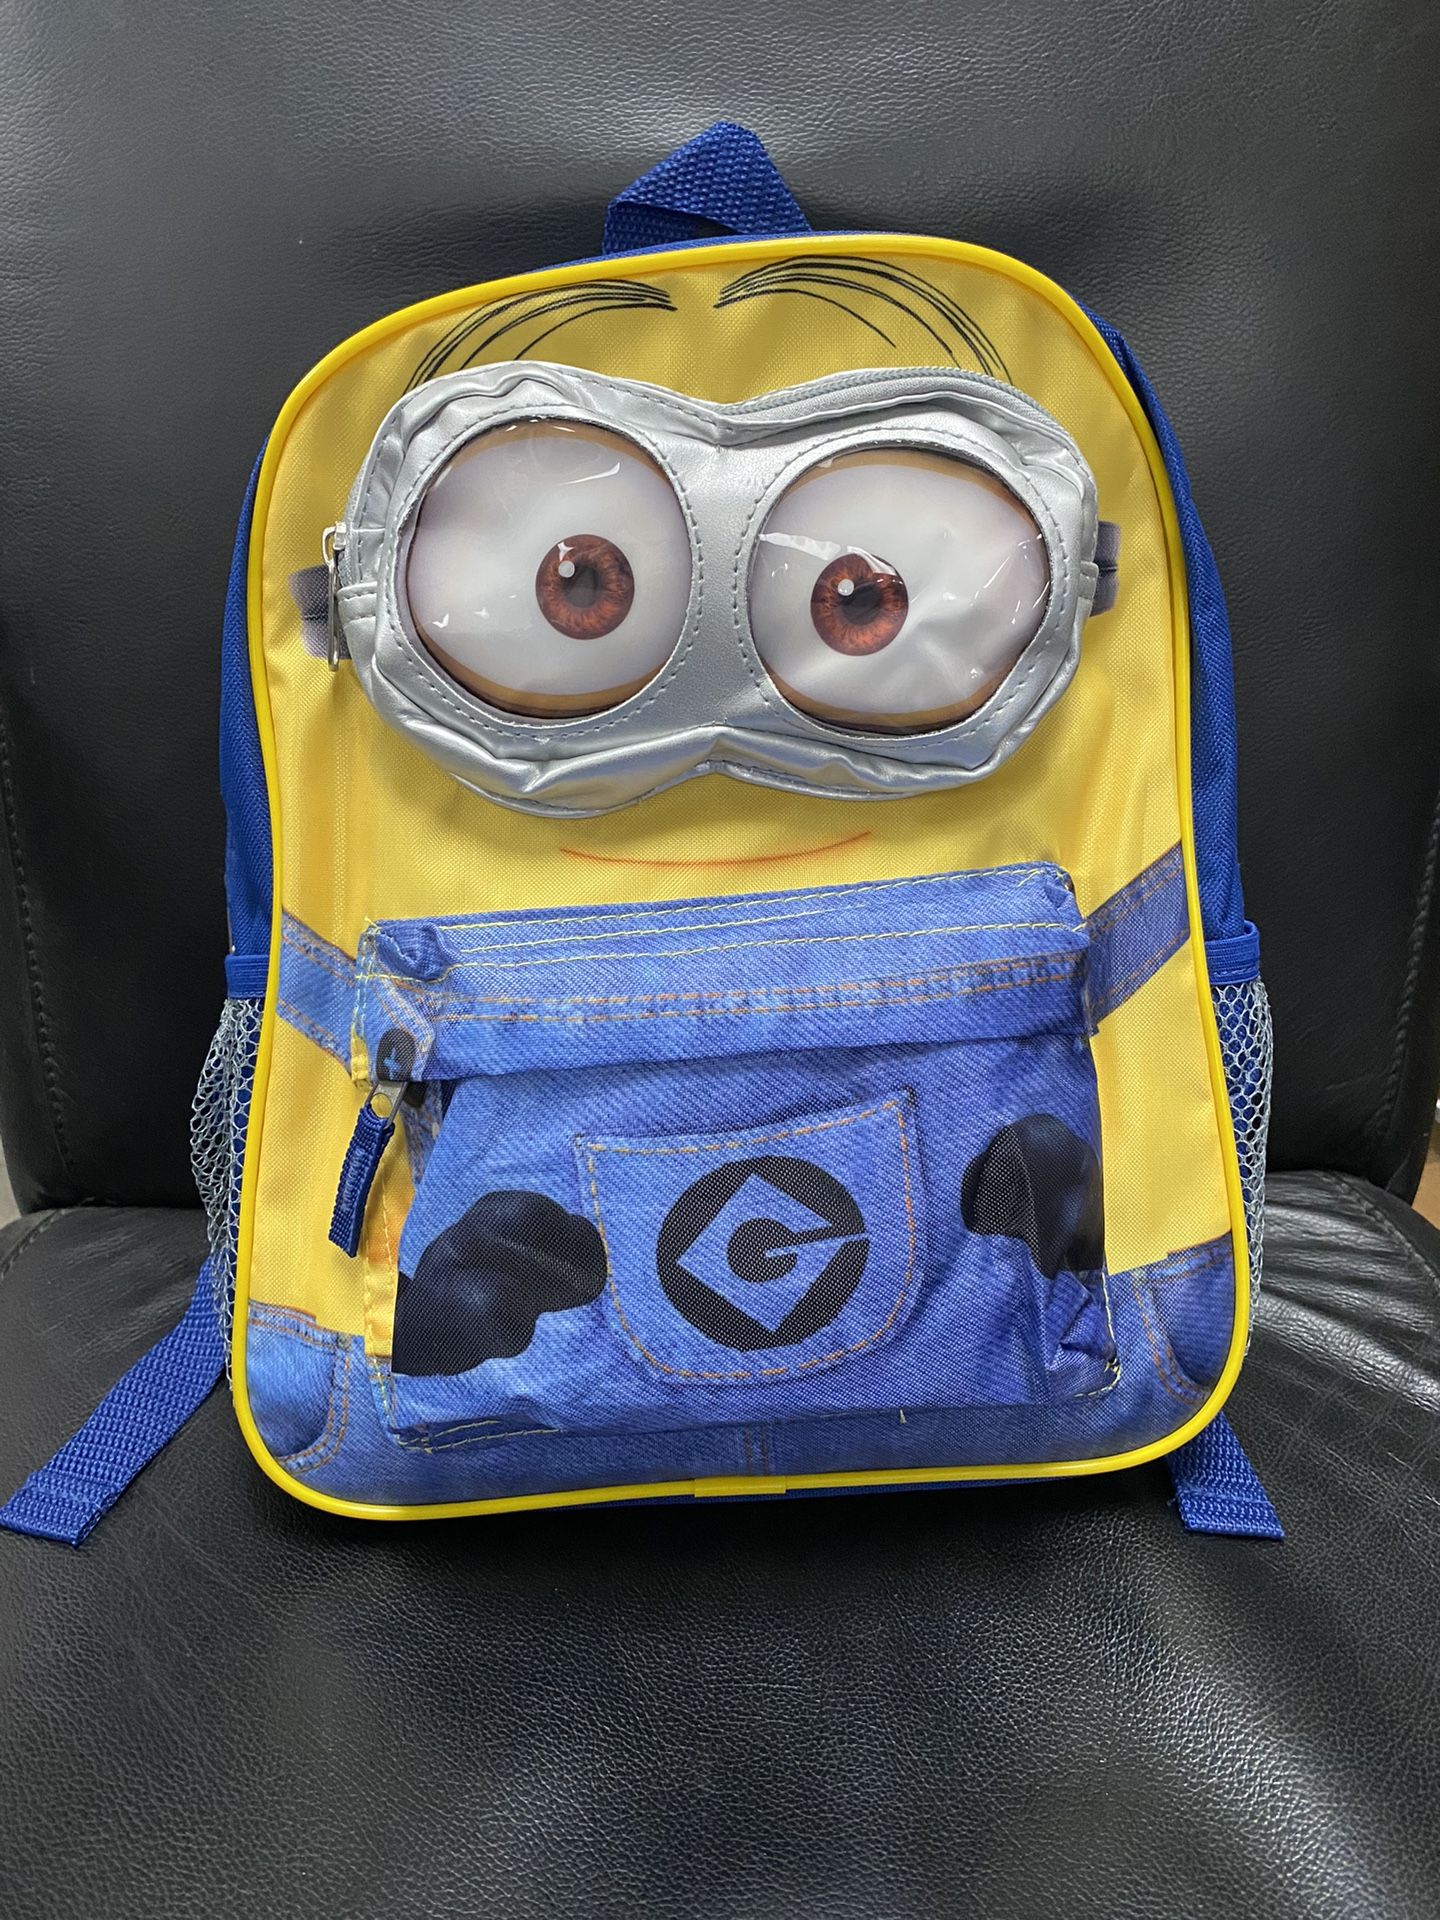 Minion Backpack for Sale in El Monte, CA - OfferUp